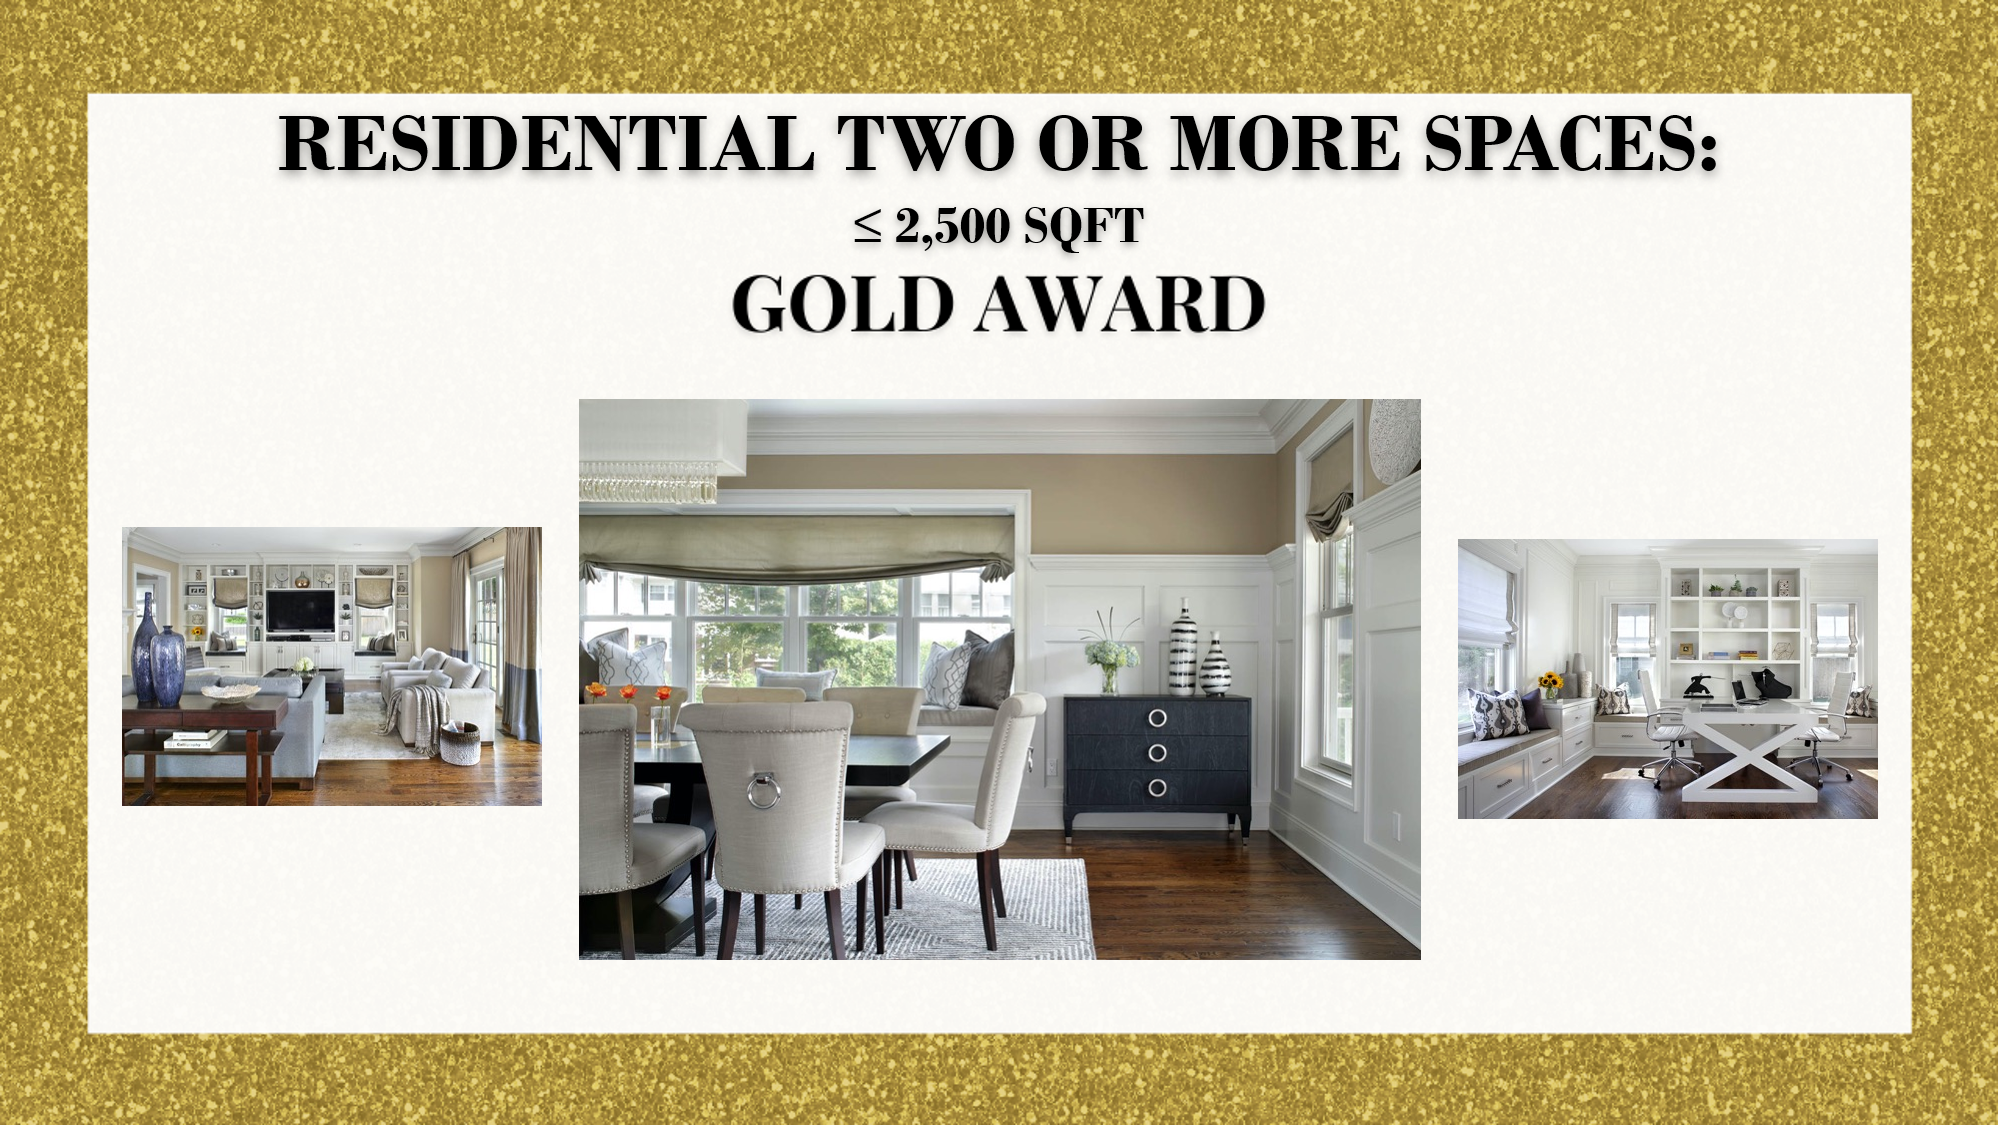 Gold Award Residential Two or More Spaces